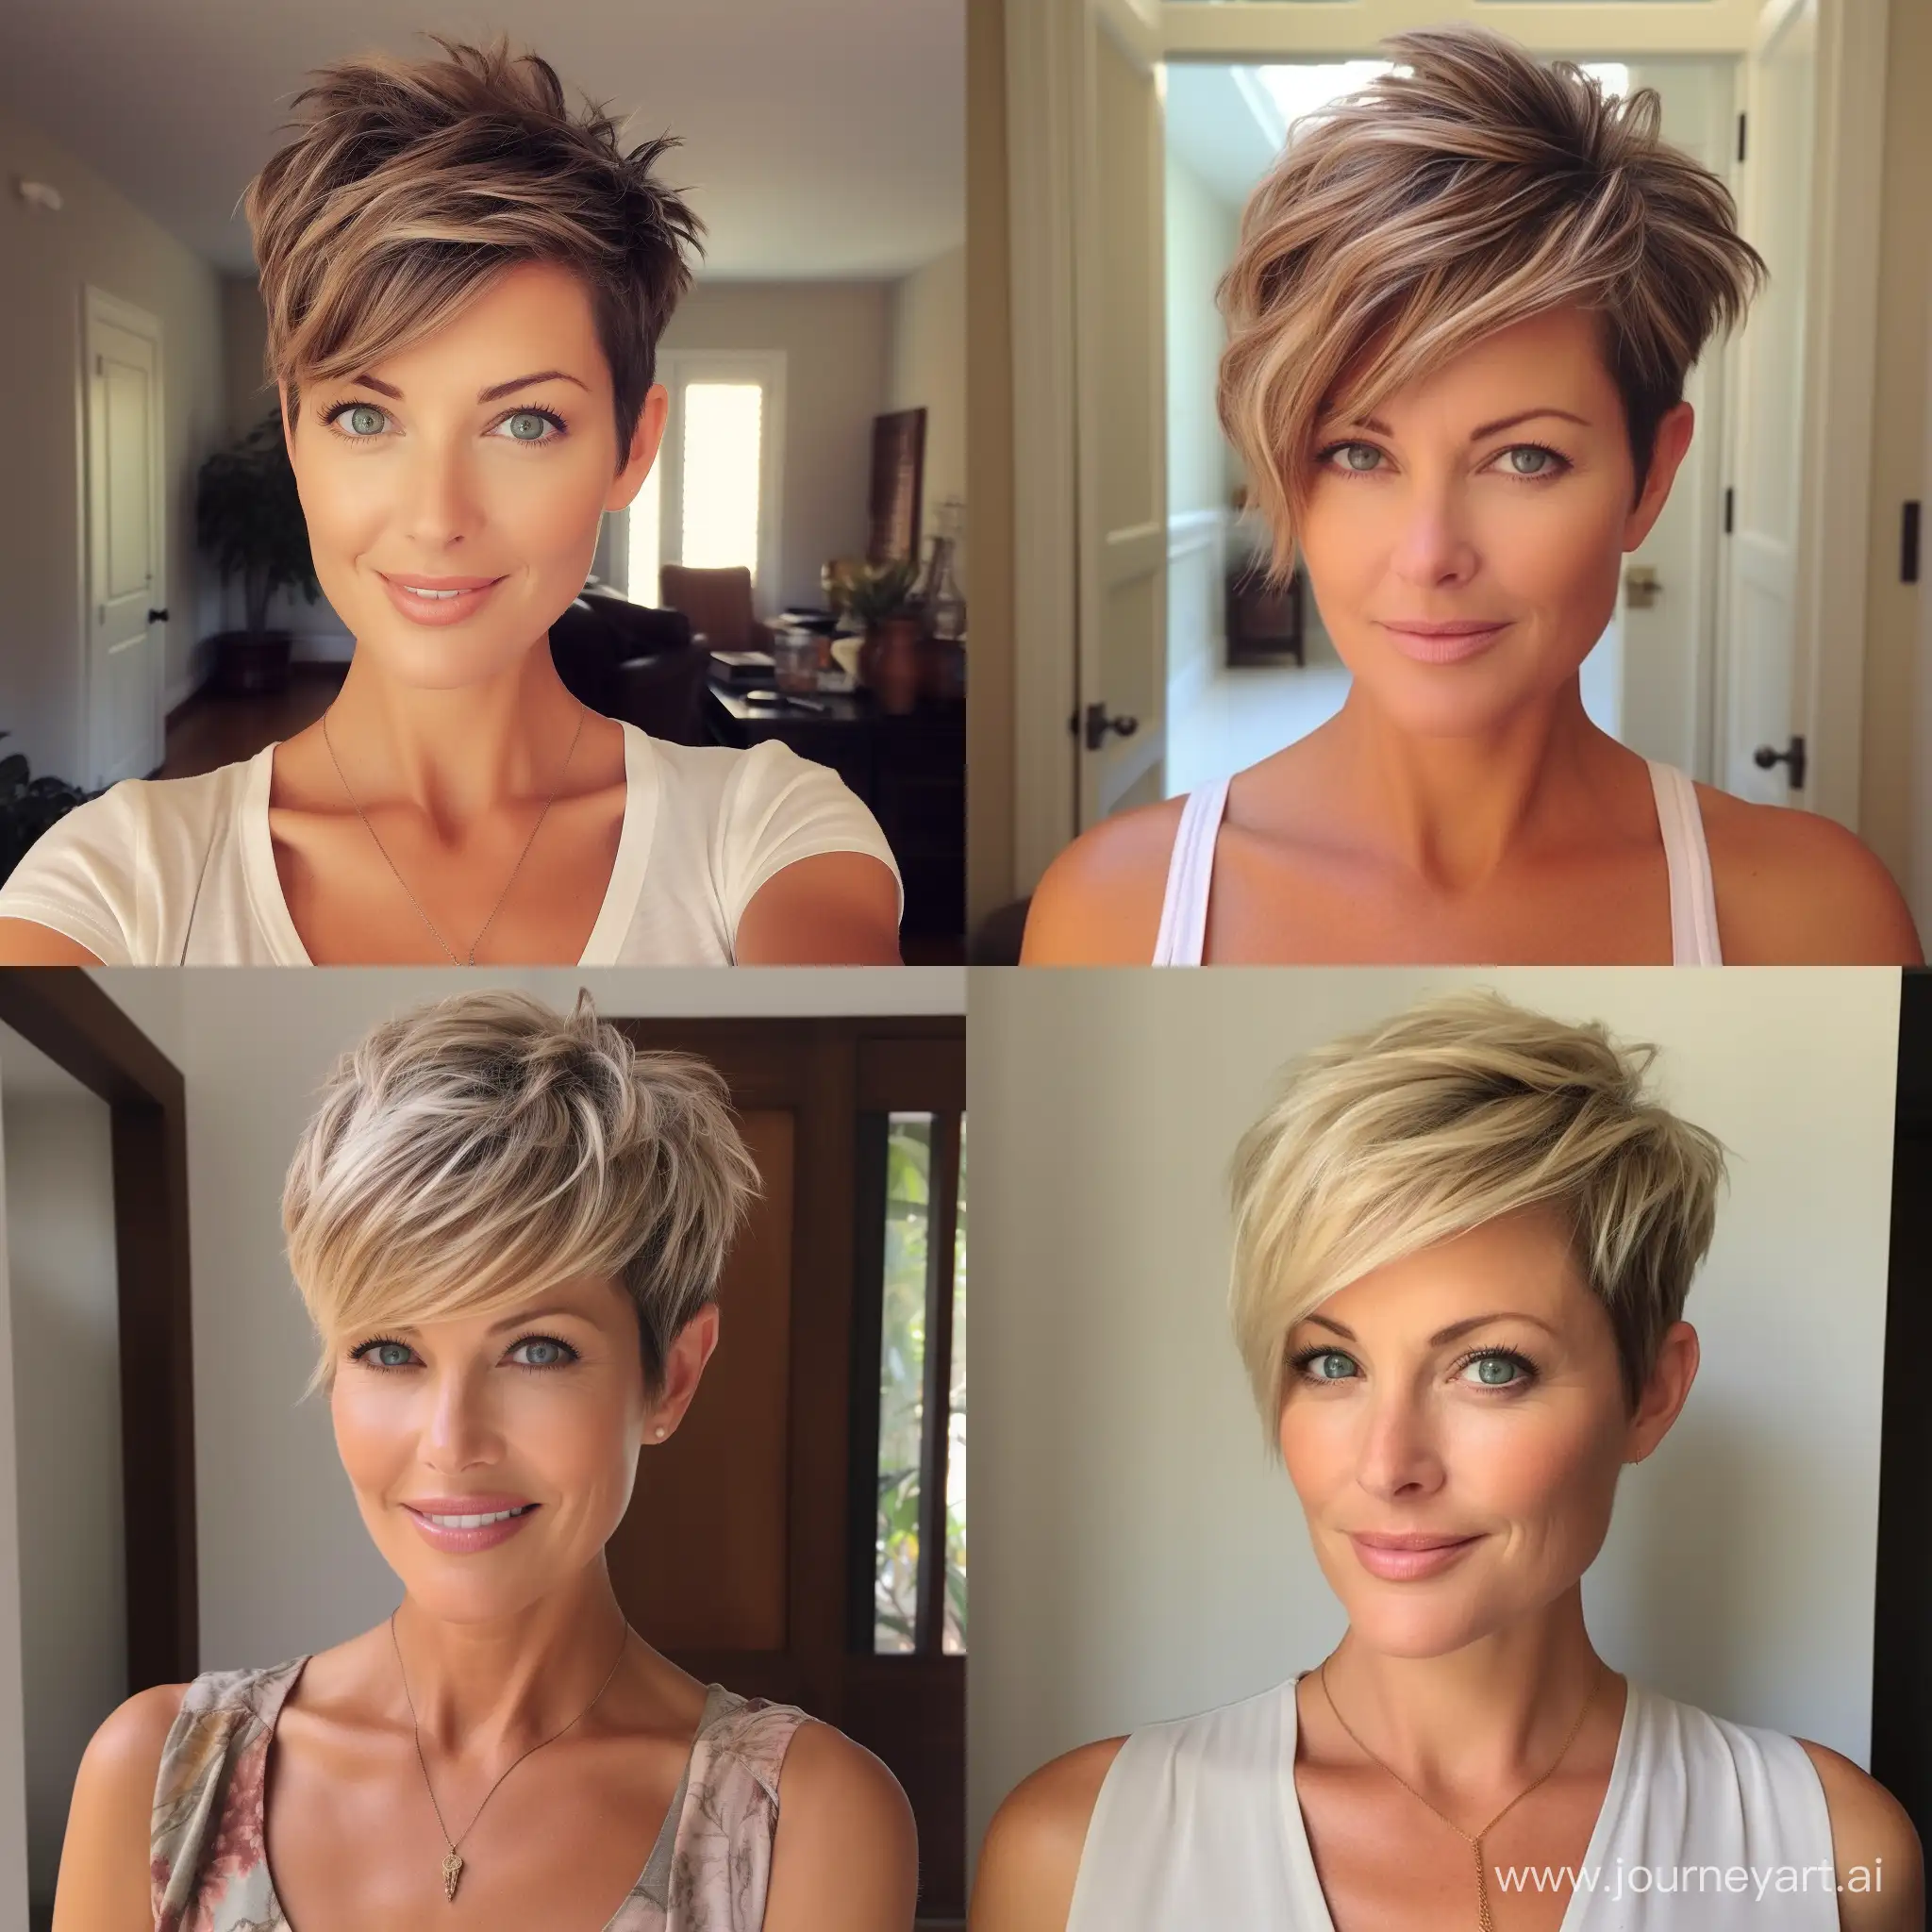 Chic-Short-Hairstyles-for-Women-Over-40-AR-11-No-11755